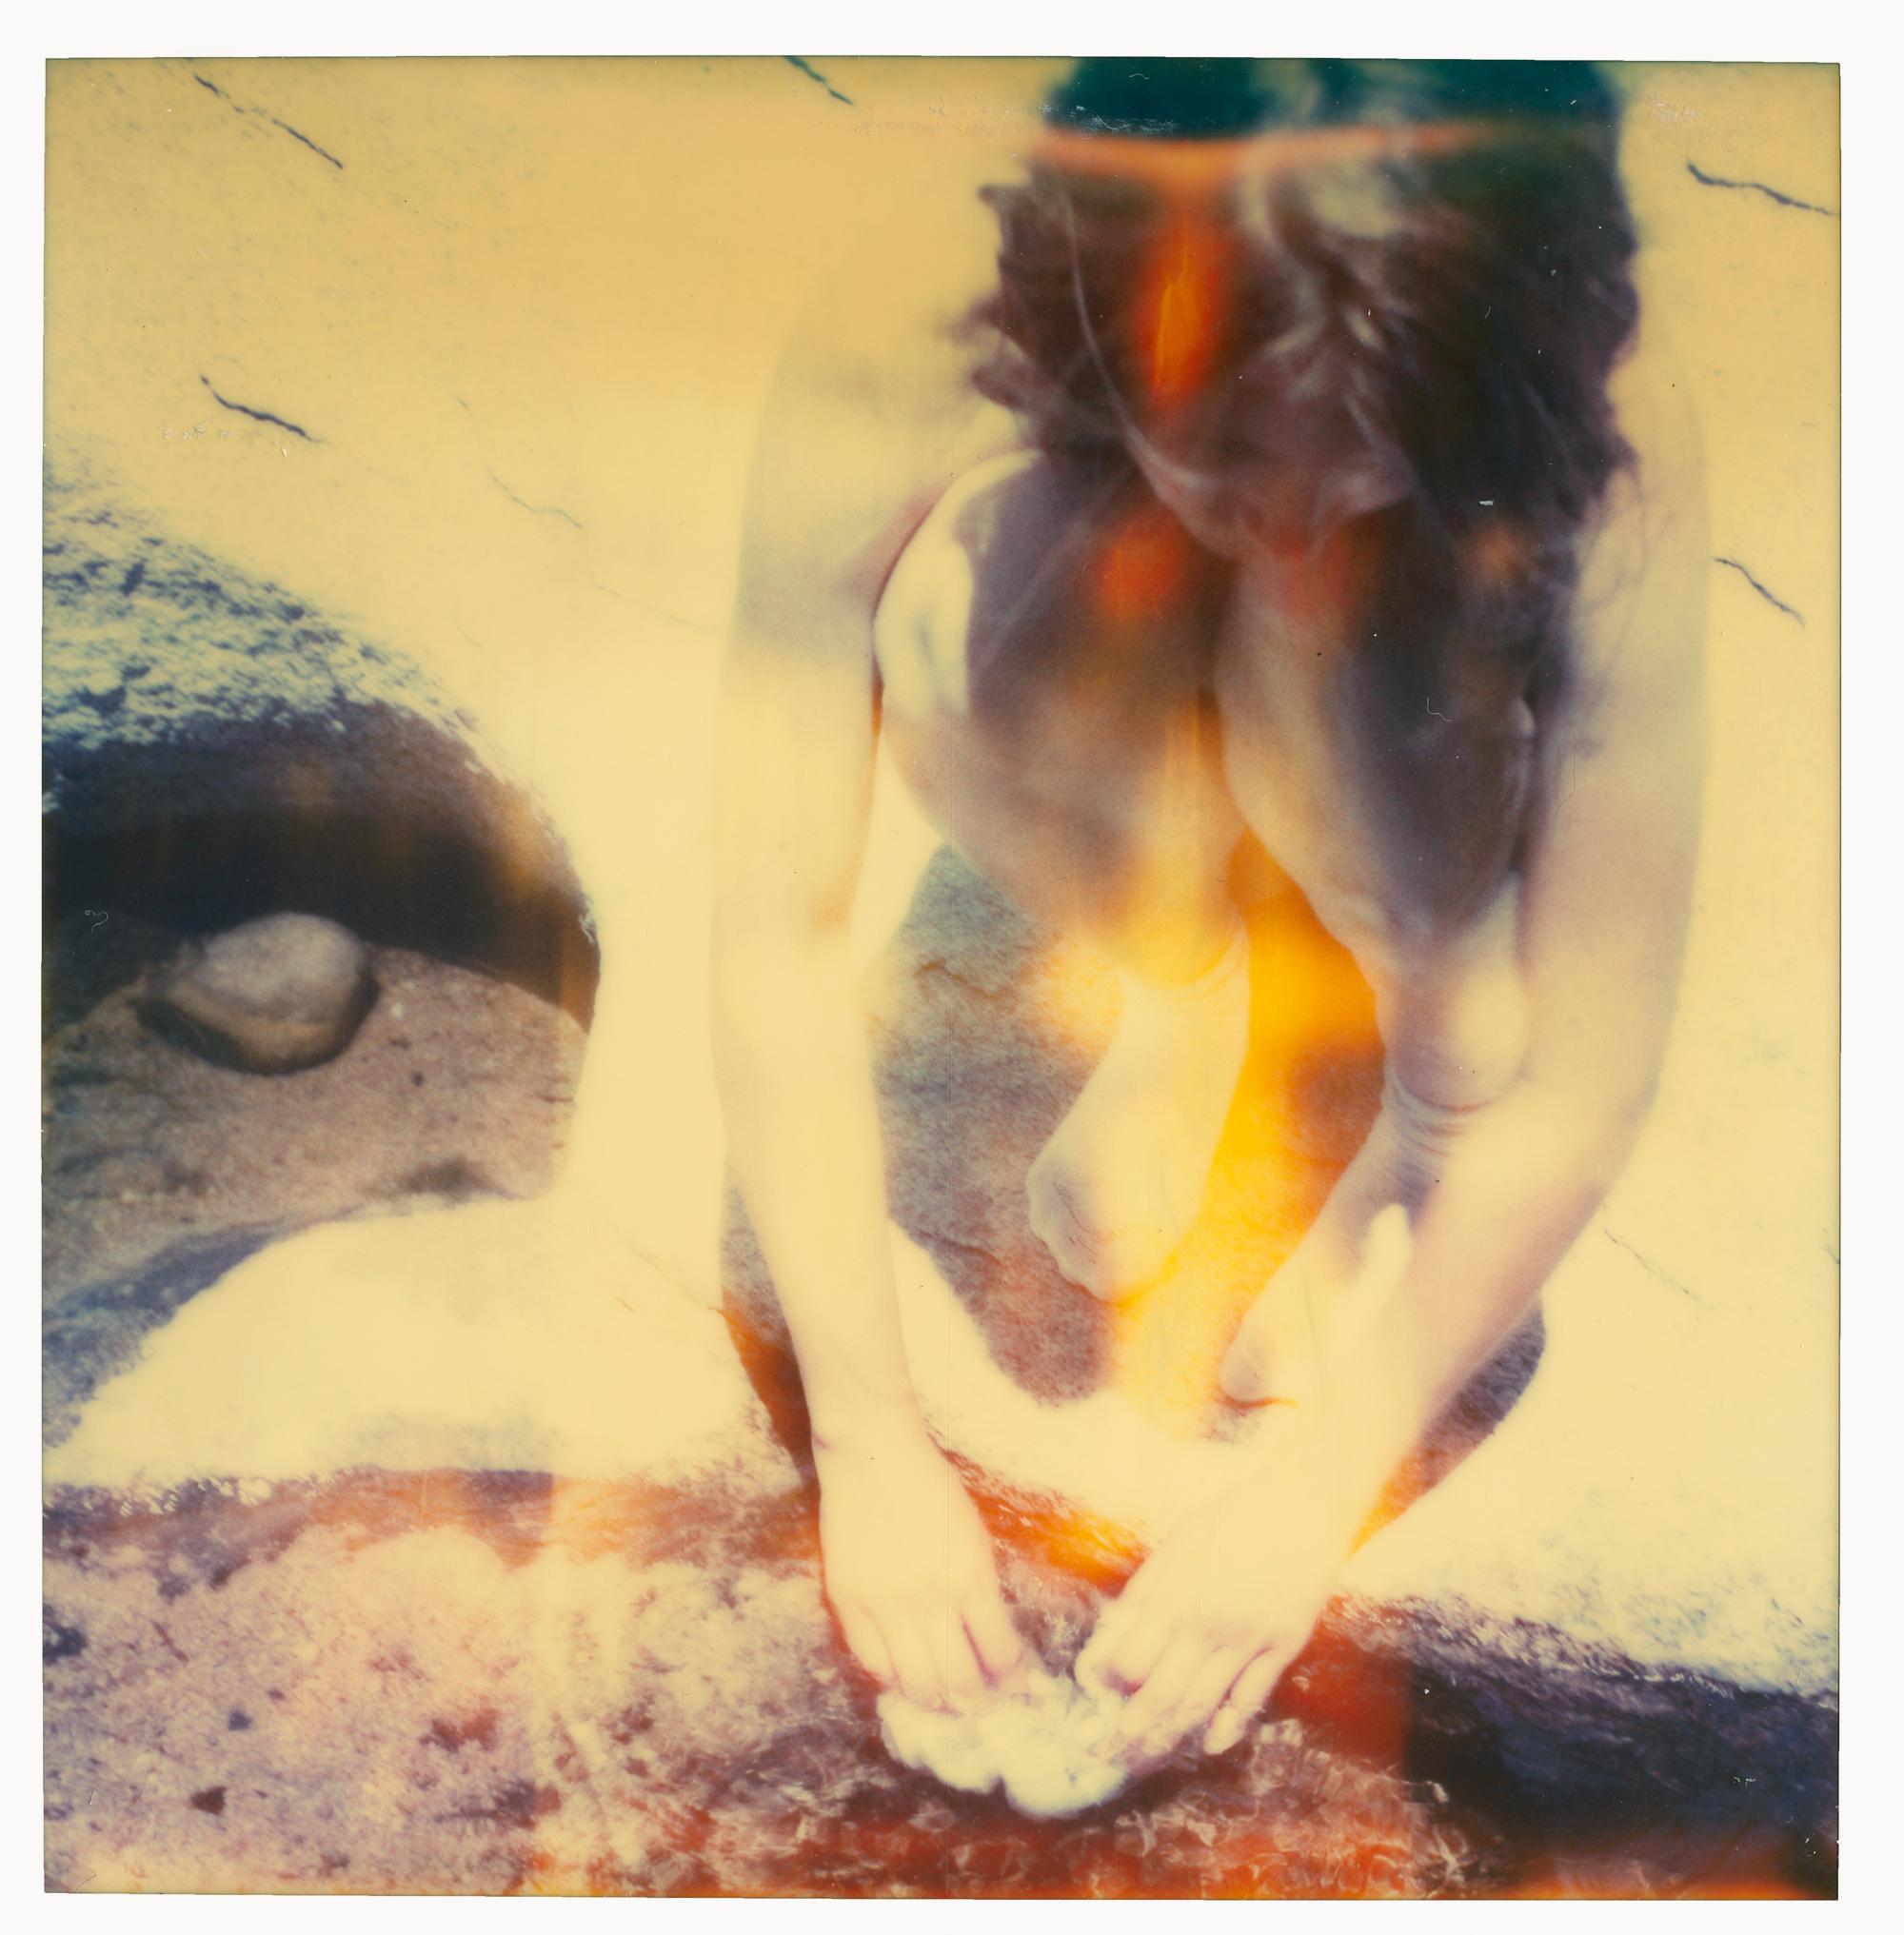 Planet of the Apes - 7 pieces complete Series - Summer Sale  - Polaroid, Color - Contemporary Photograph by Stefanie Schneider